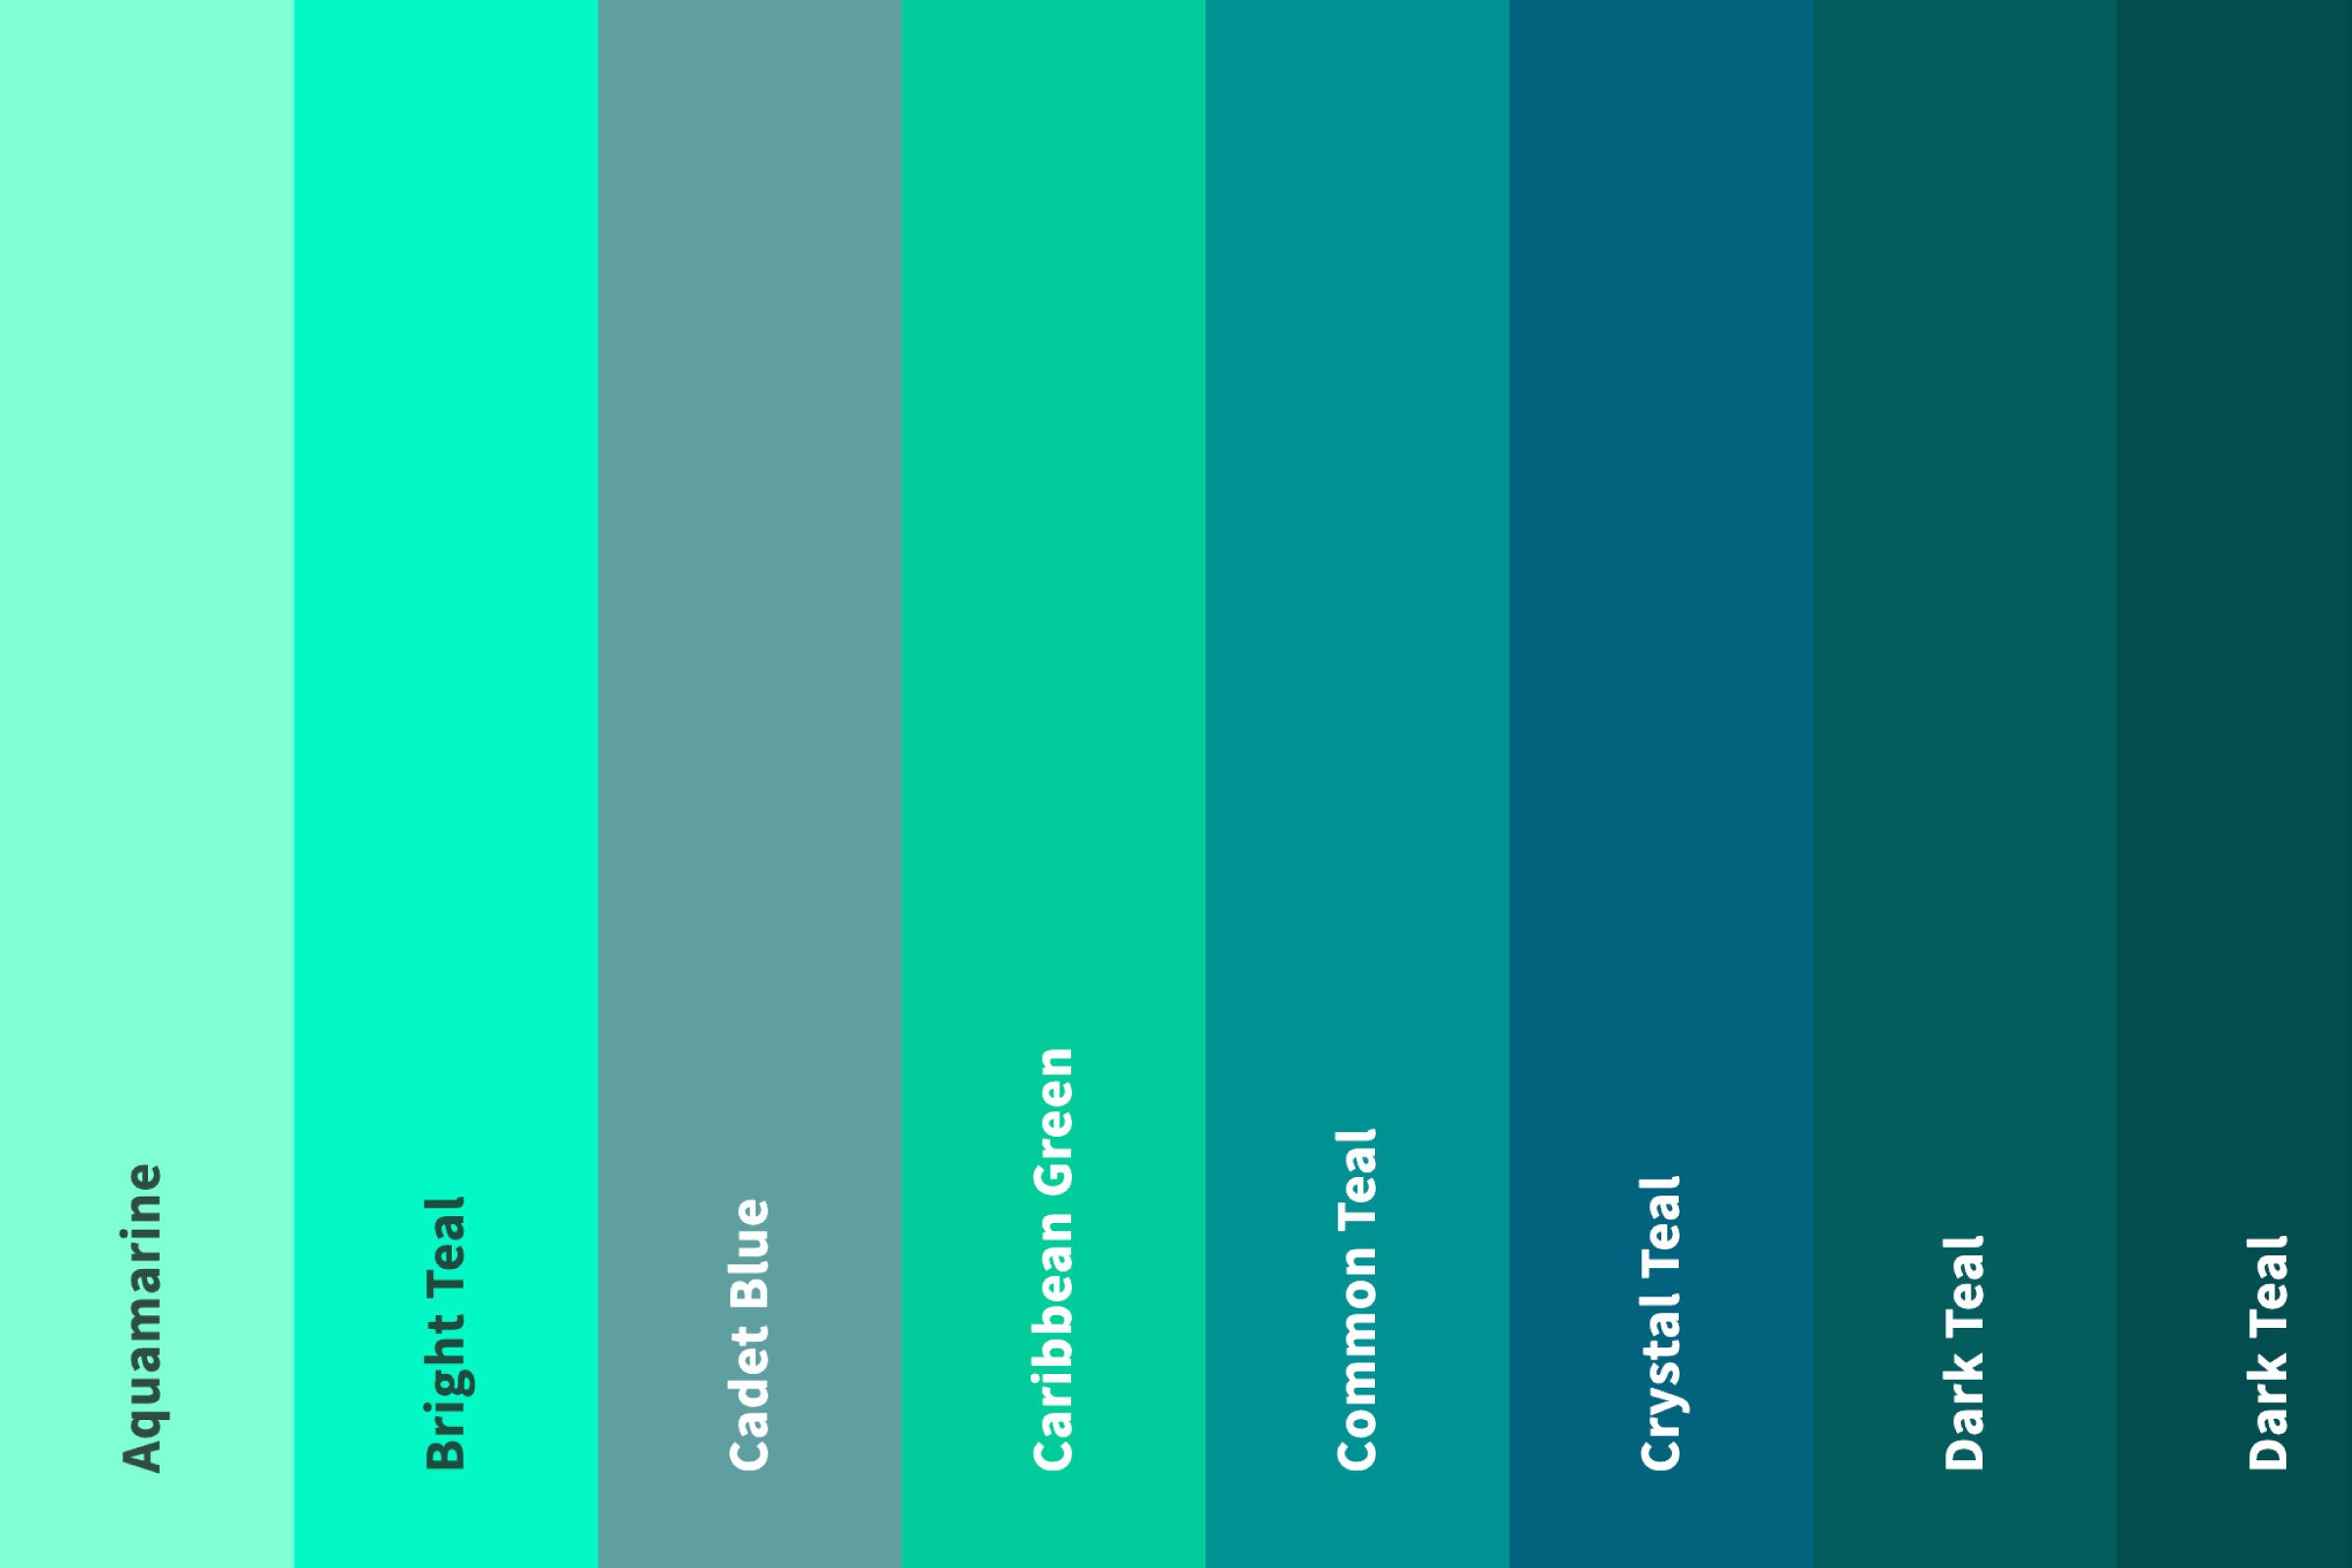 Blue over teal hair: alternative color combinations to try - wide 1